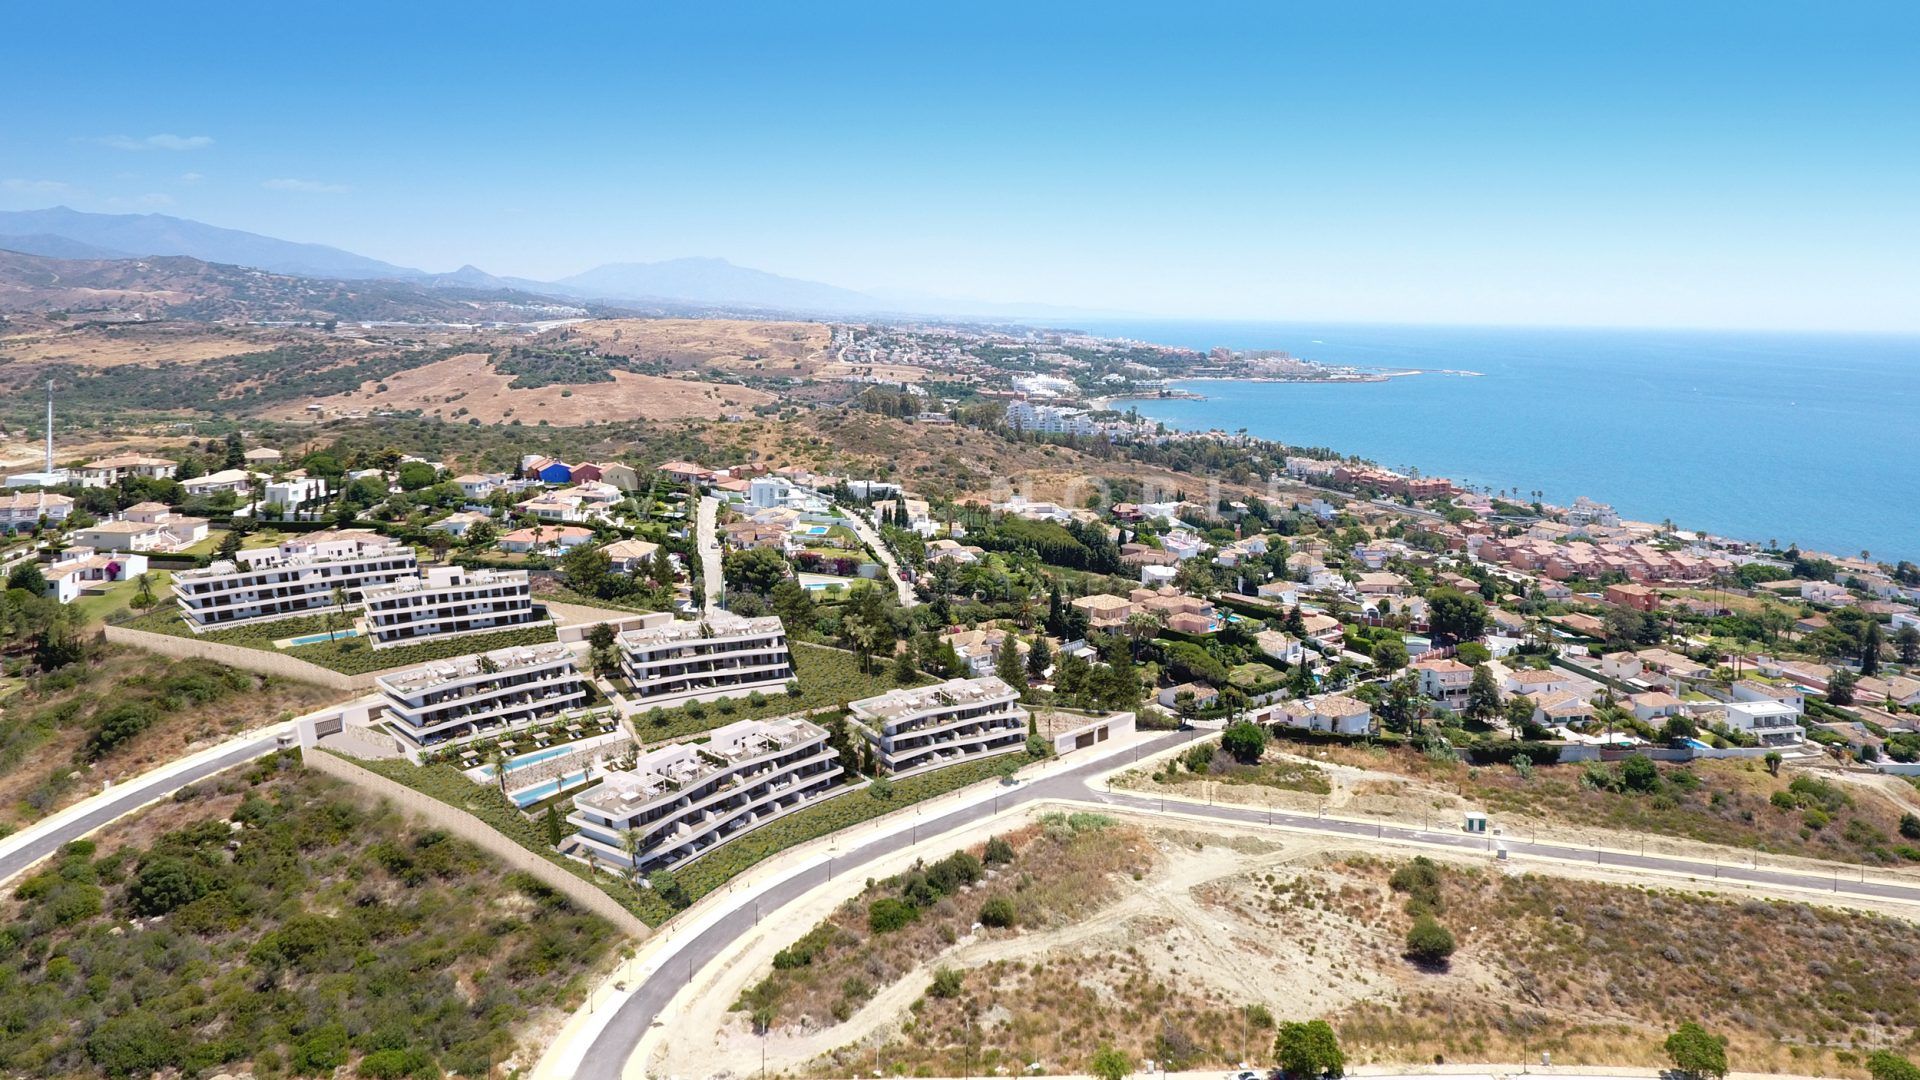 Last units for sale, ready to move in! New development close to amenities in Estepona